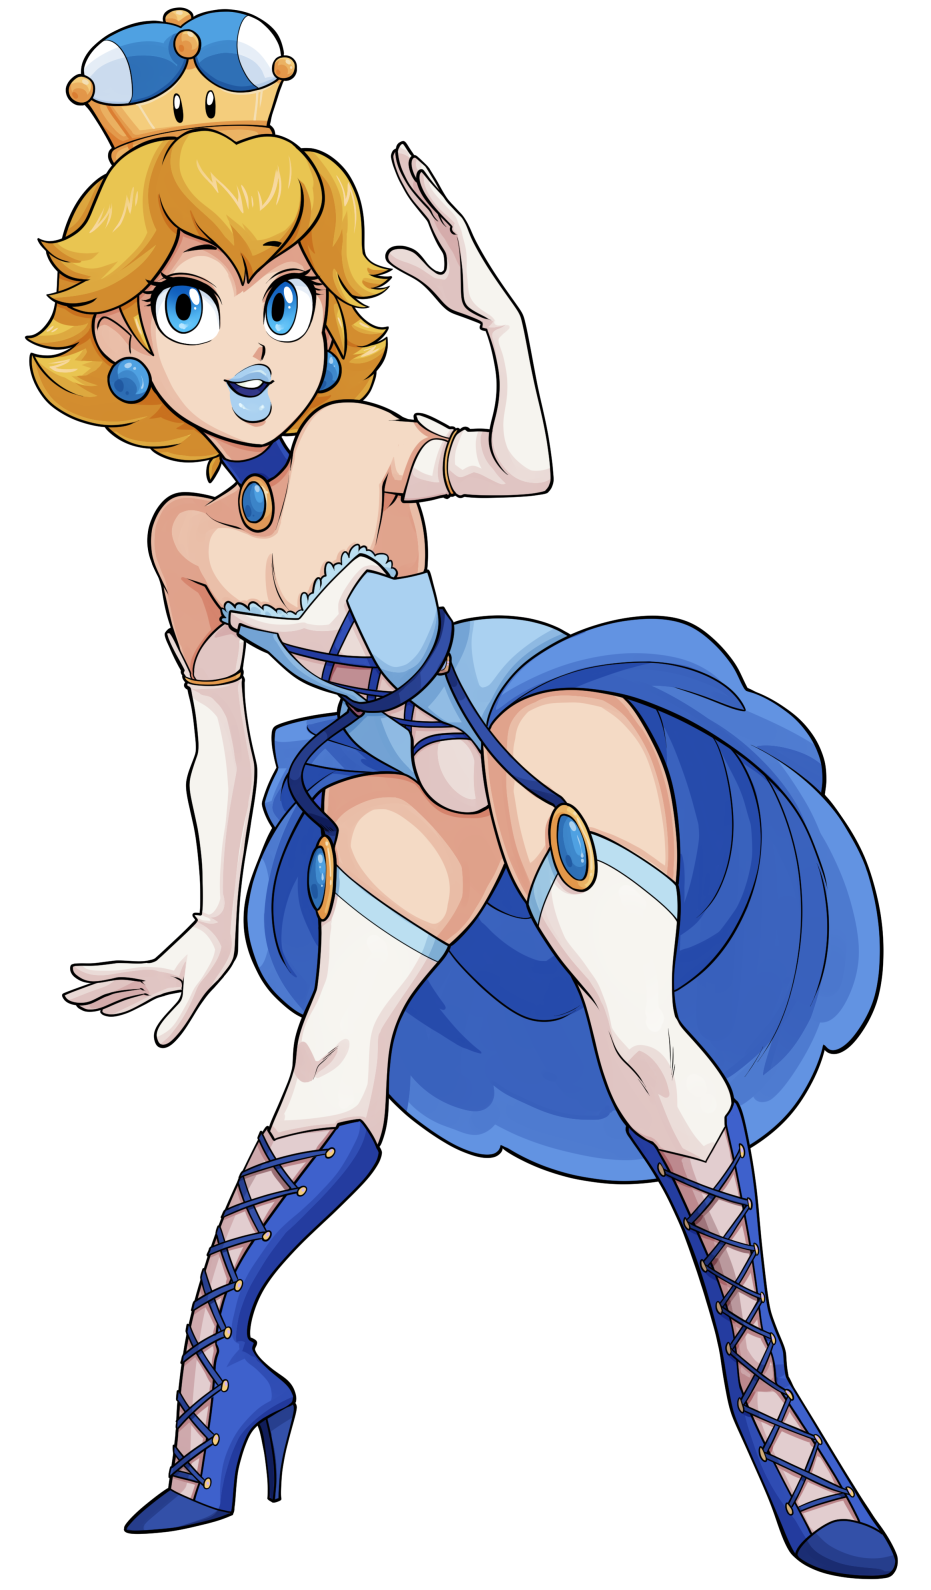 bunnox: Super Crown but it turns you into a femboy? Yes plz. Prince Peach femboy